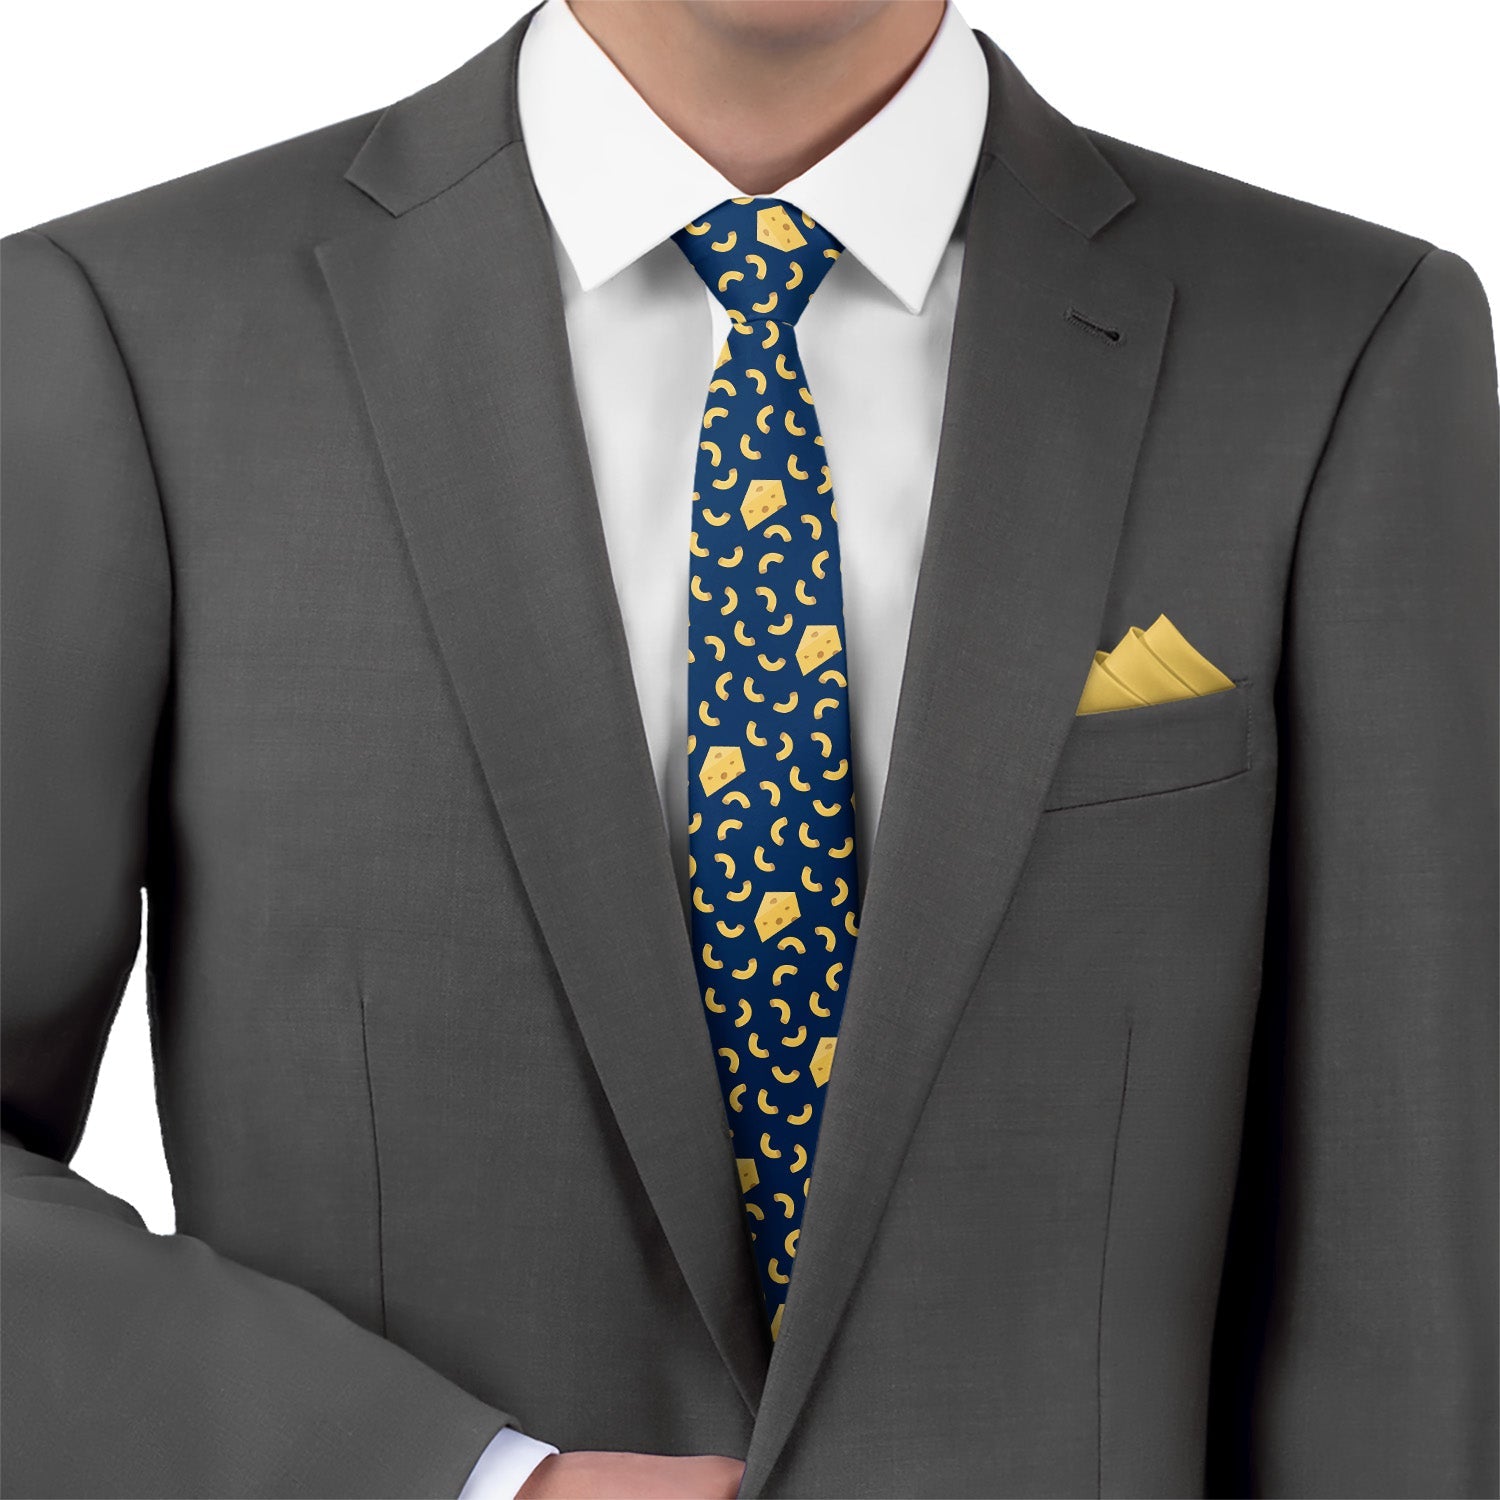 Mac N Cheese Necktie - Matching Pocket Square - Knotty Tie Co.